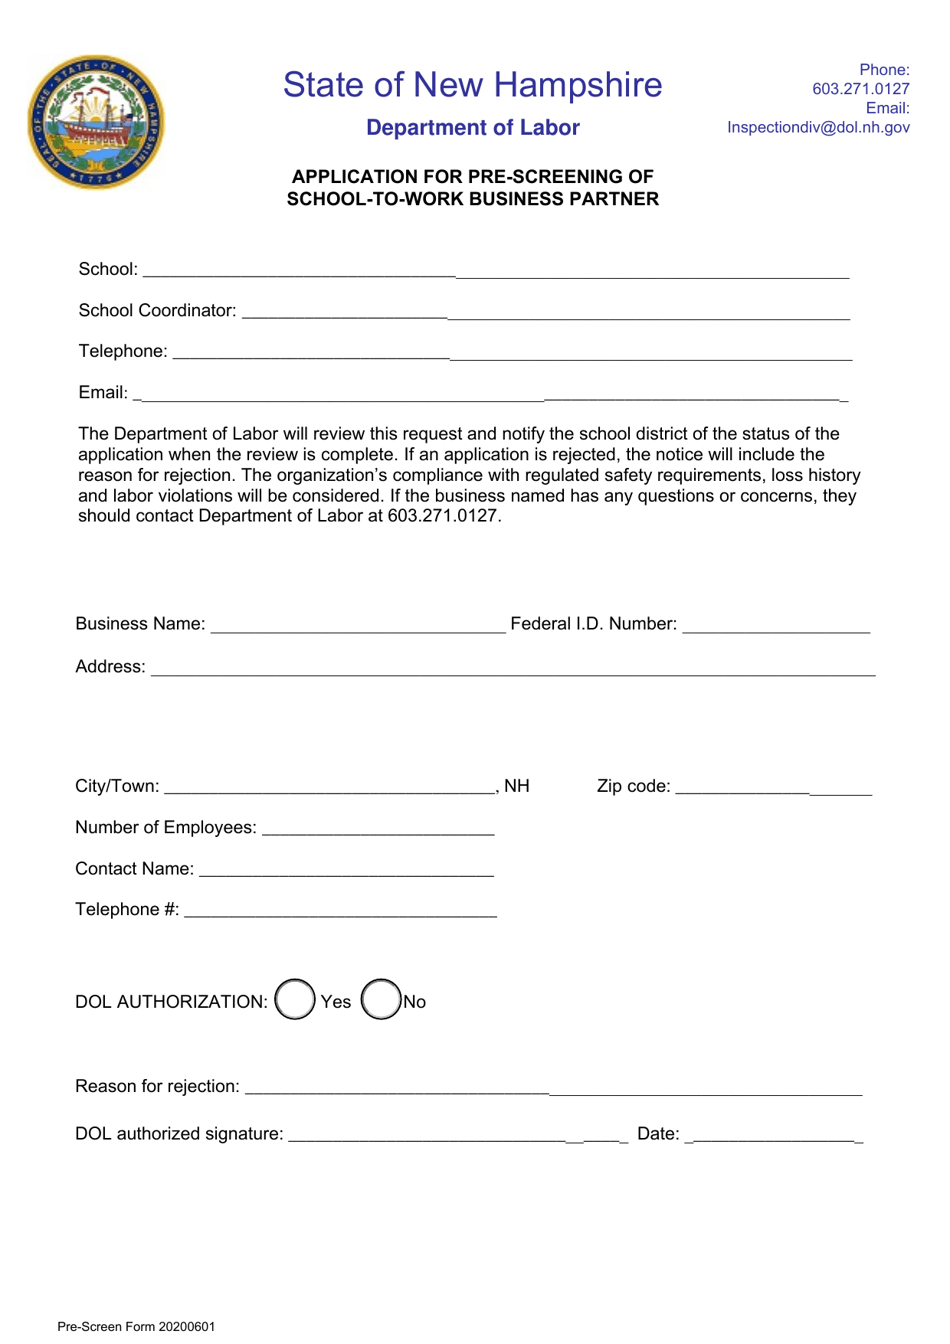 Application for Pre-screening of School-To-Work Business Partner - New Hampshire, Page 1